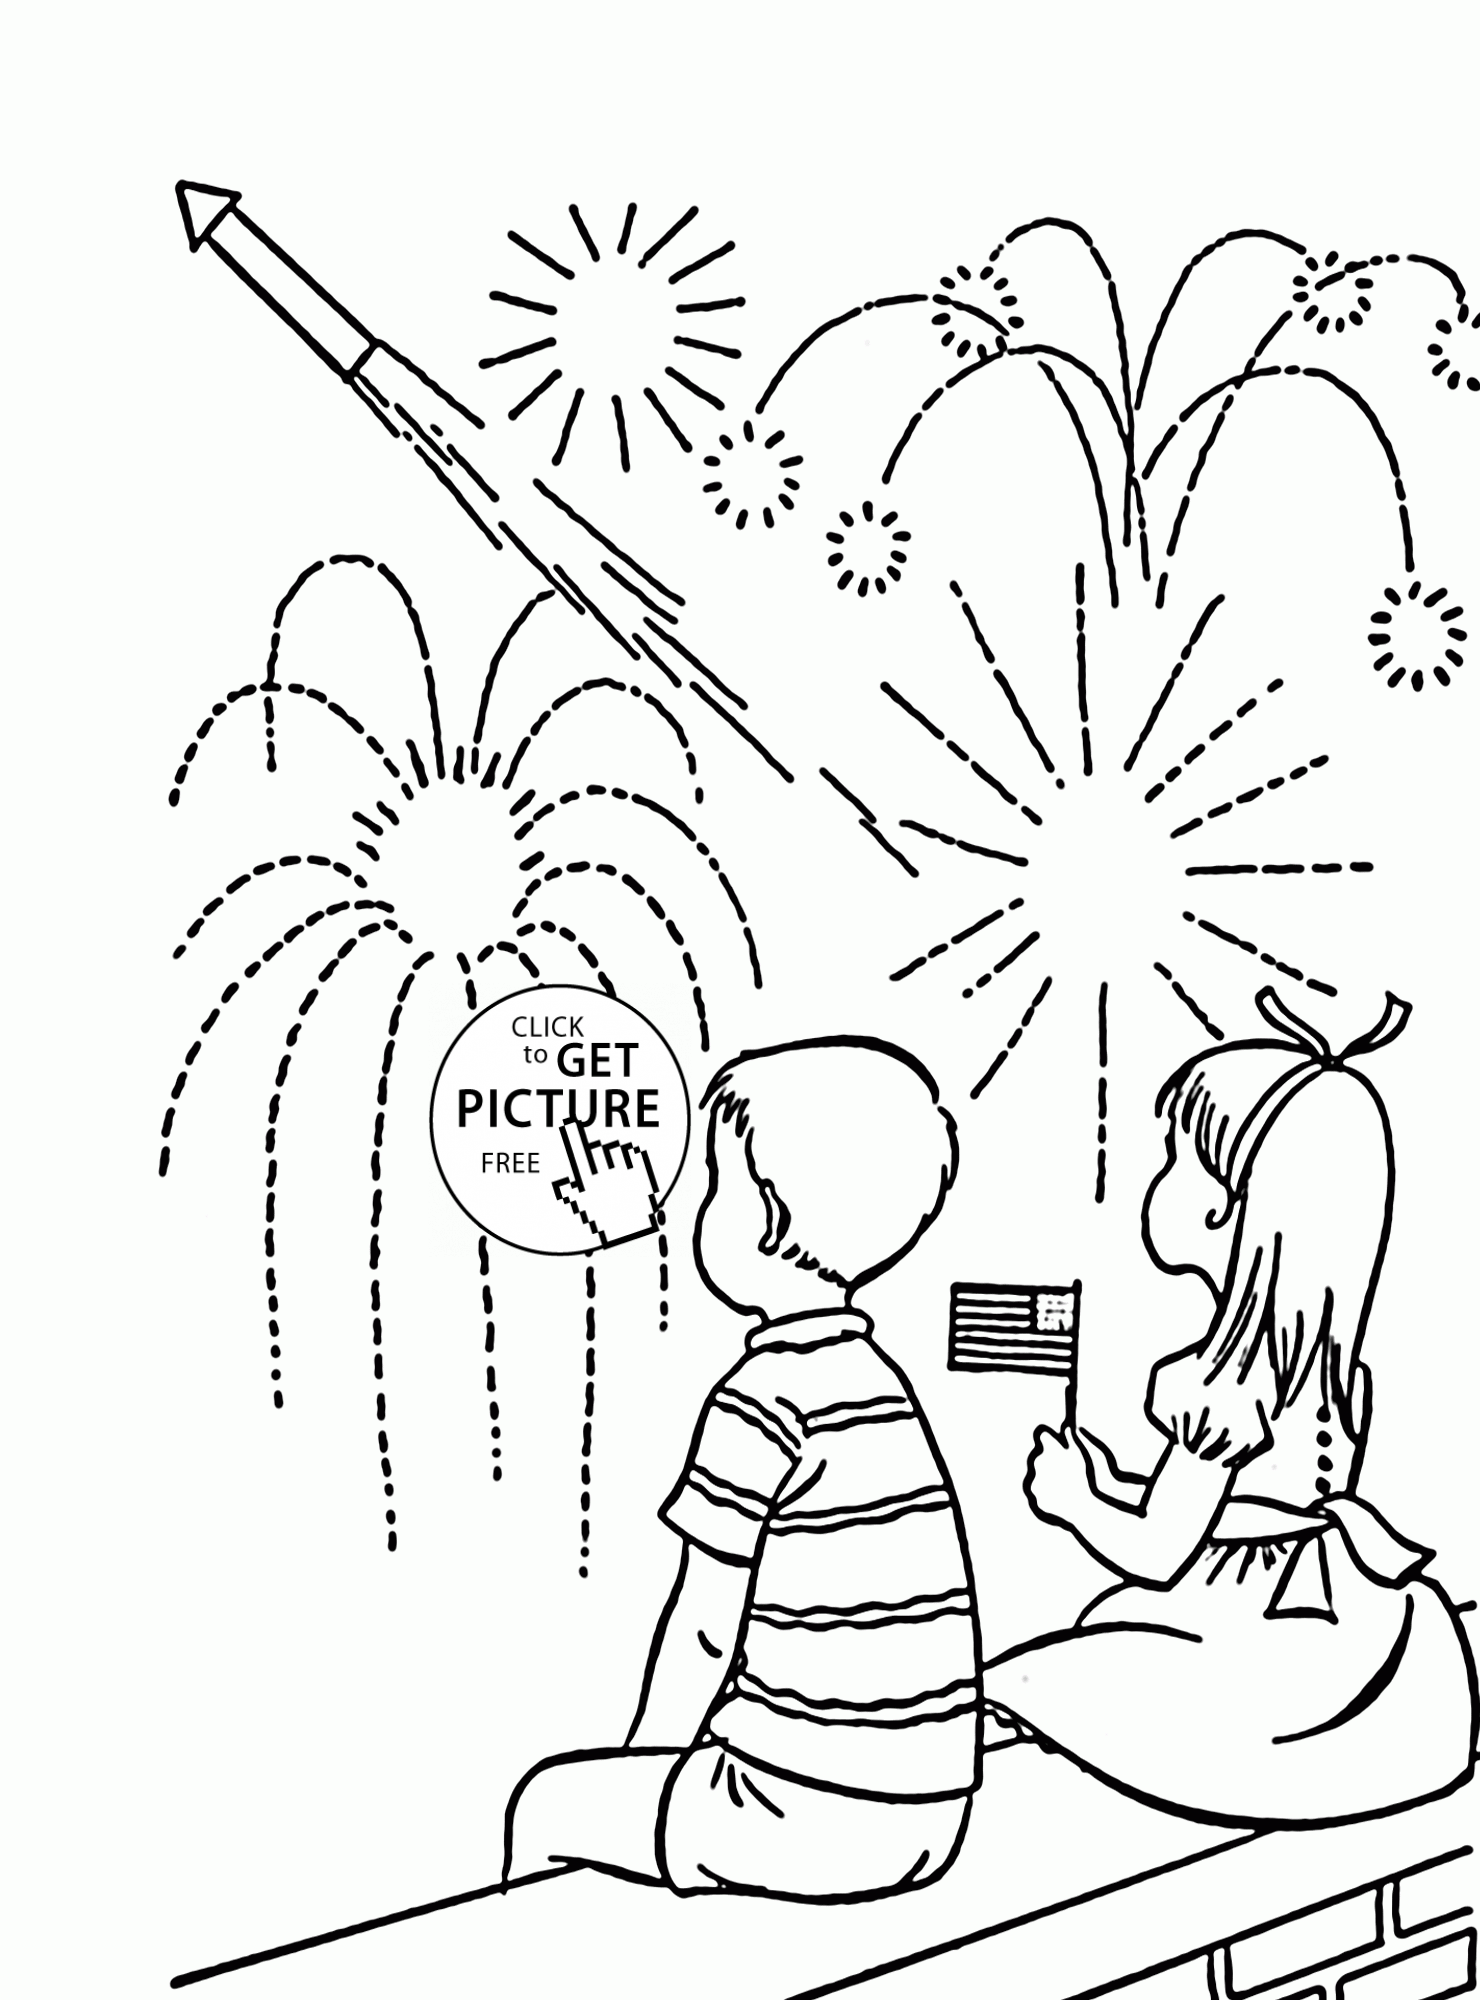 Kids and Fireworks - Independence Day coloring page for kids ...